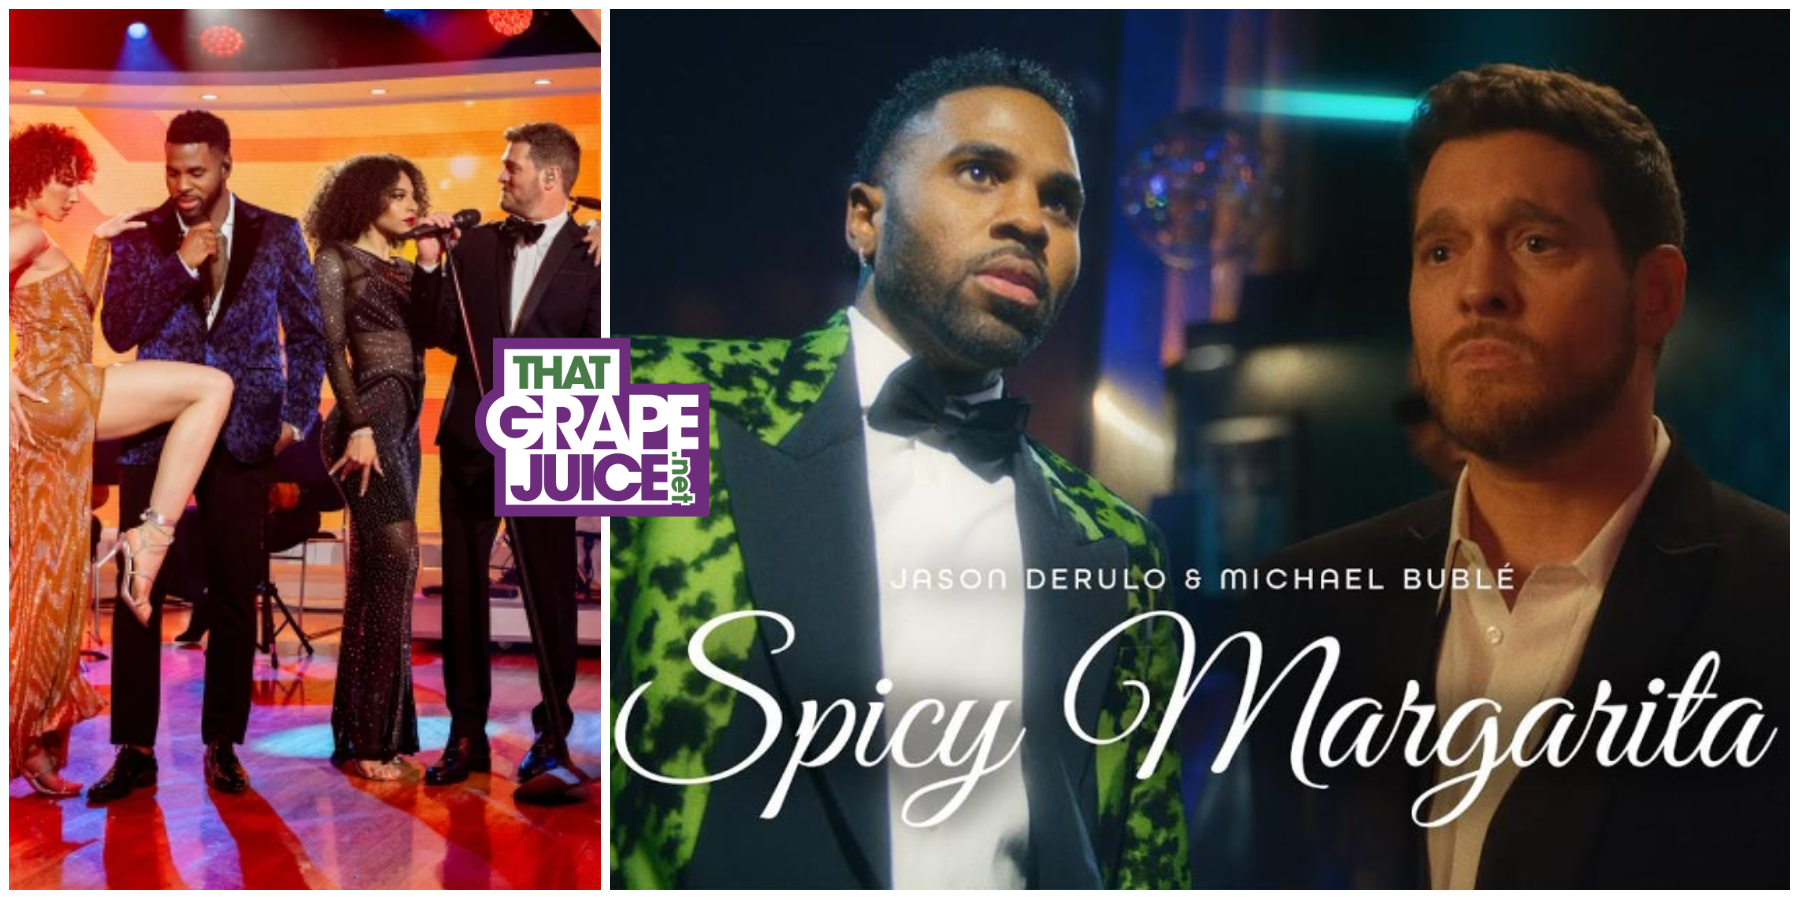 Watch: Jason Derulo & Michael Buble Perform ‘Spicy Margarita’ on ‘TODAY’ / Drop Song’s Official Music Video